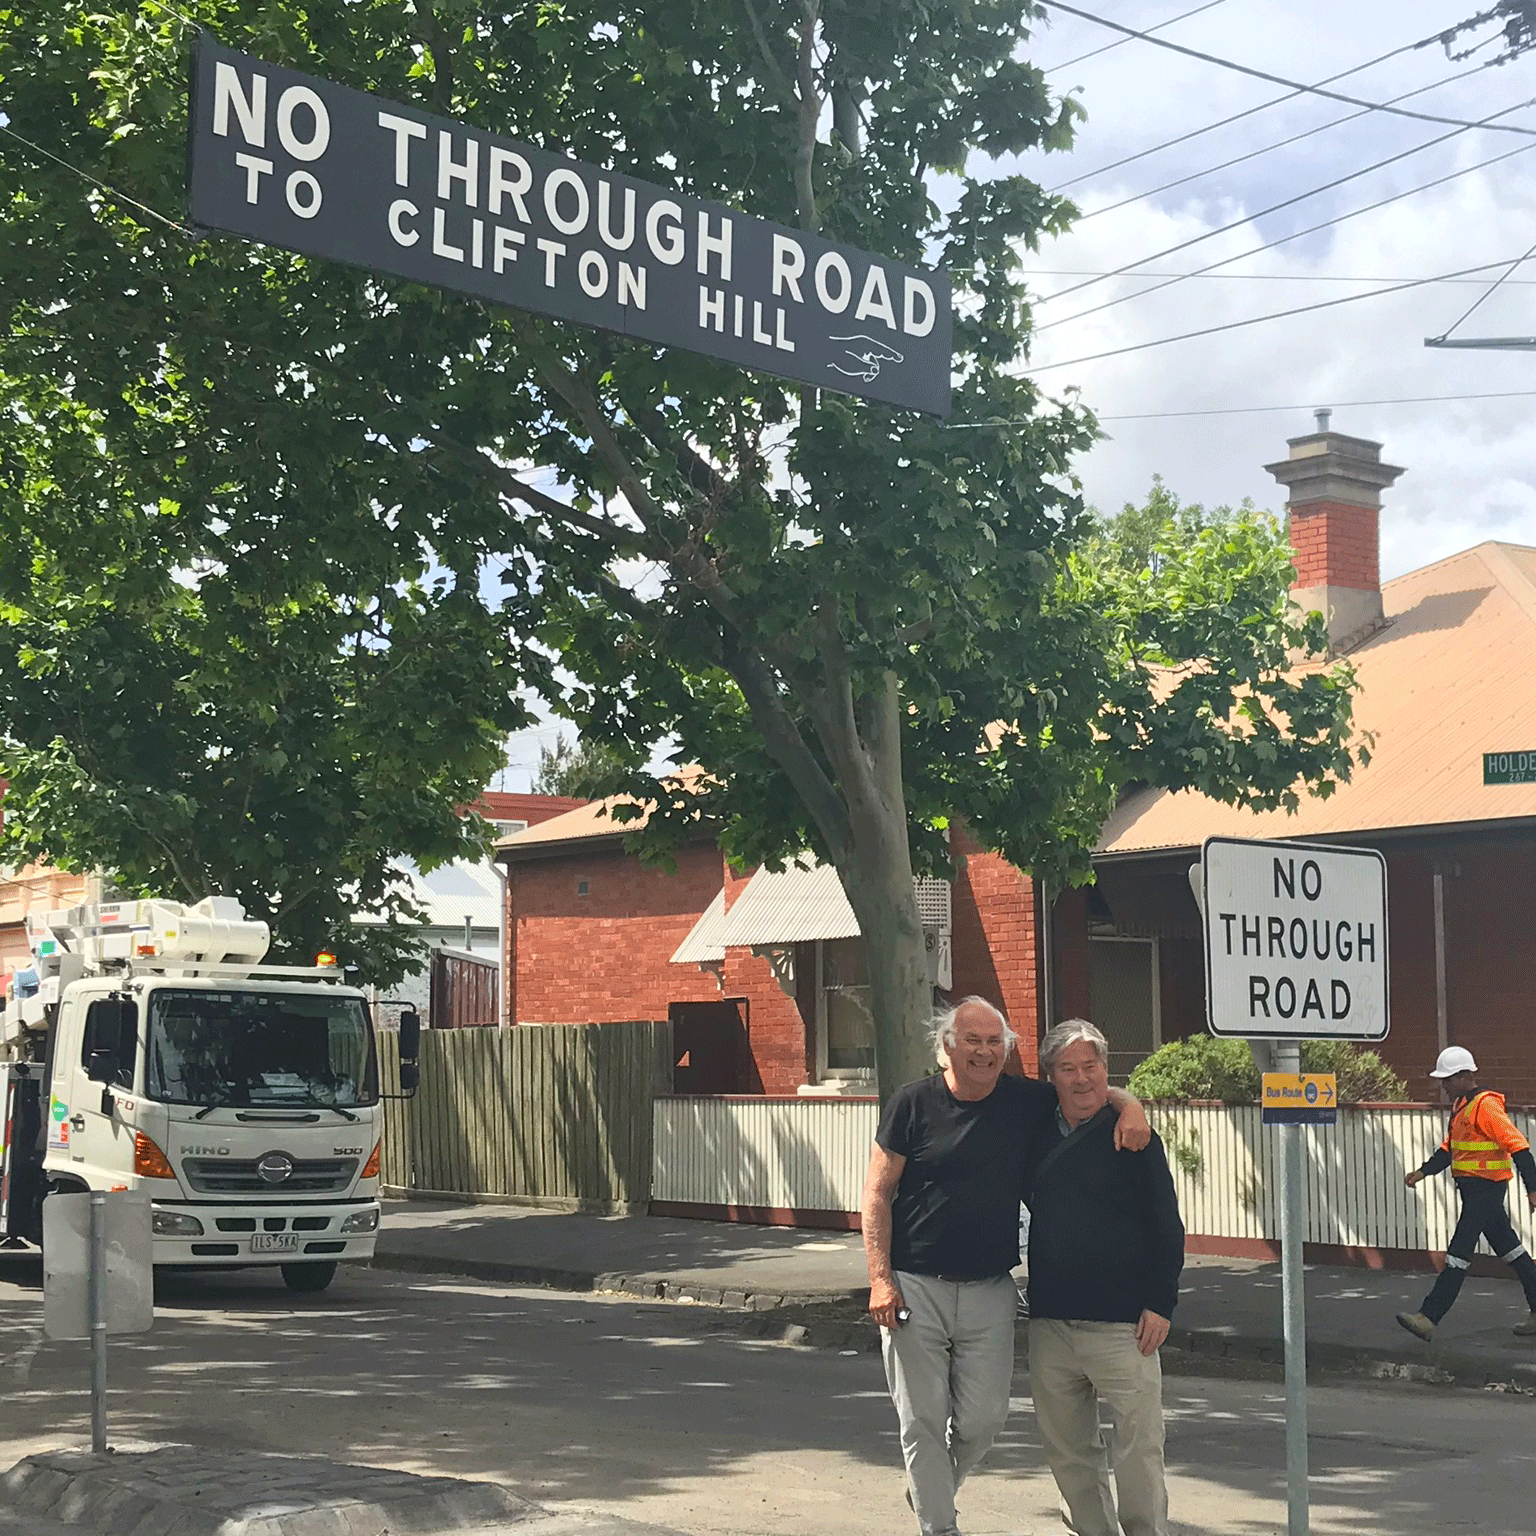 Two men standing arm in arm smiling below a No through road sign